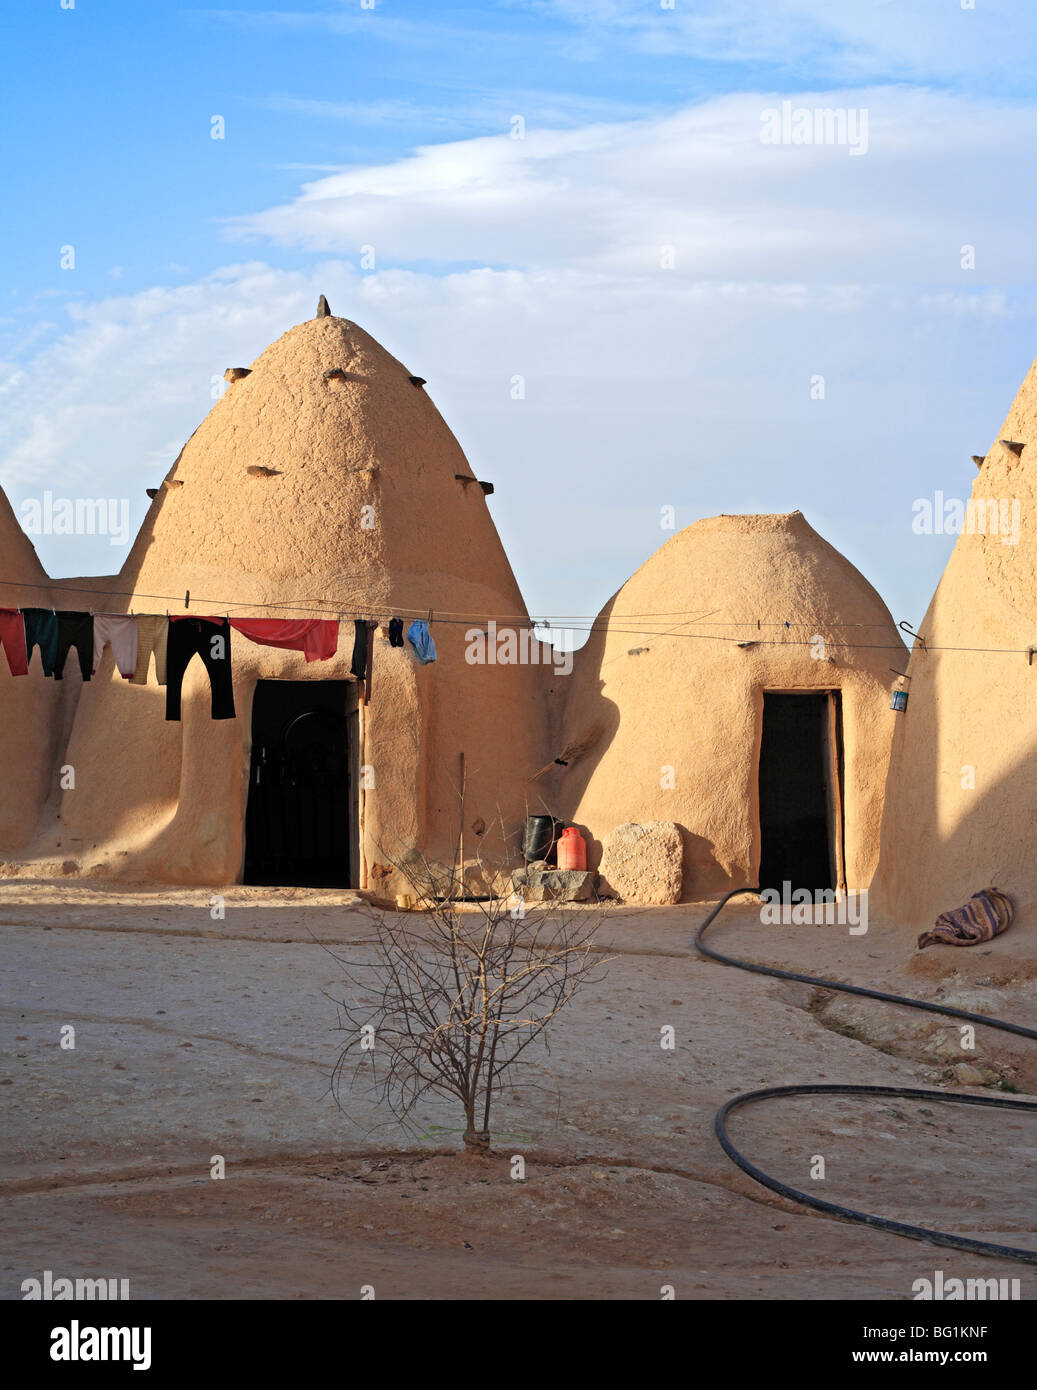 Village with traditional beehive house built of brick and mud, Srouj village, Syria, Middle East Stock Photo